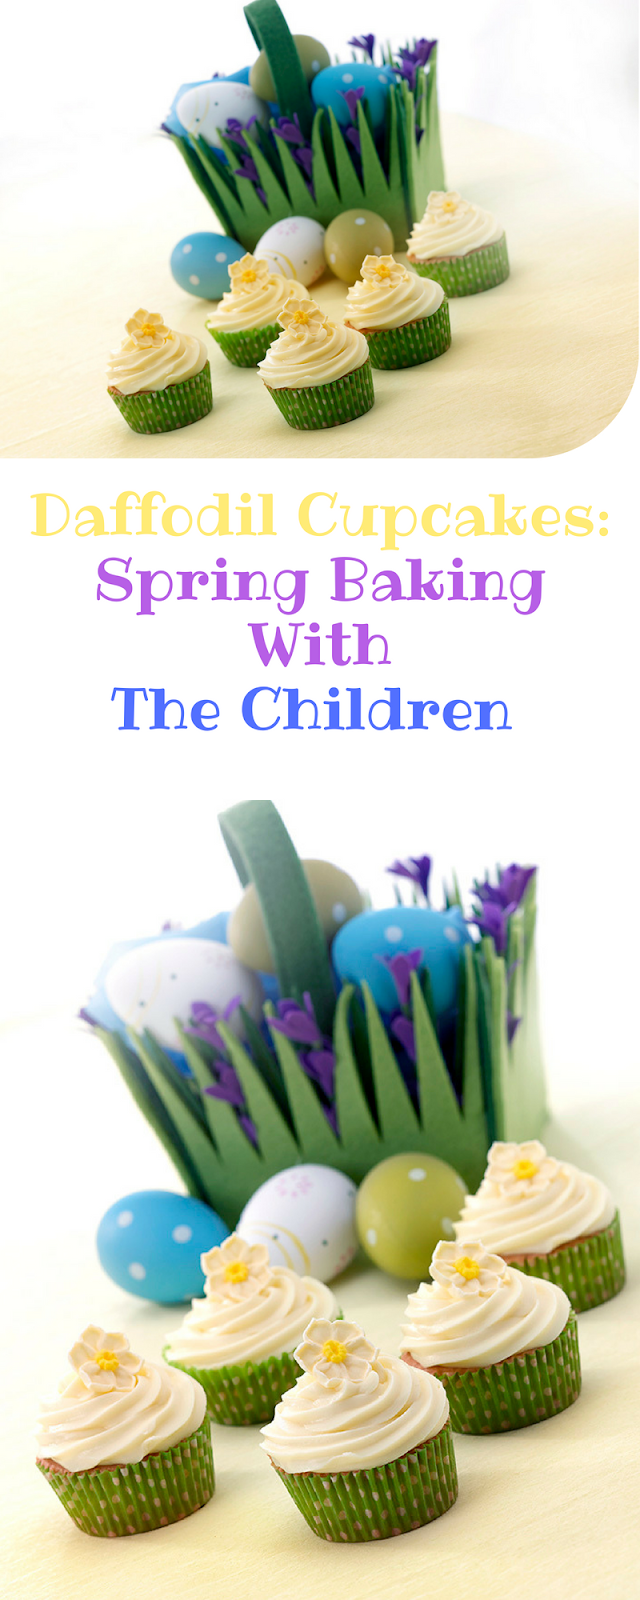 Daffodil Cupcakes: Spring Baking With The Children